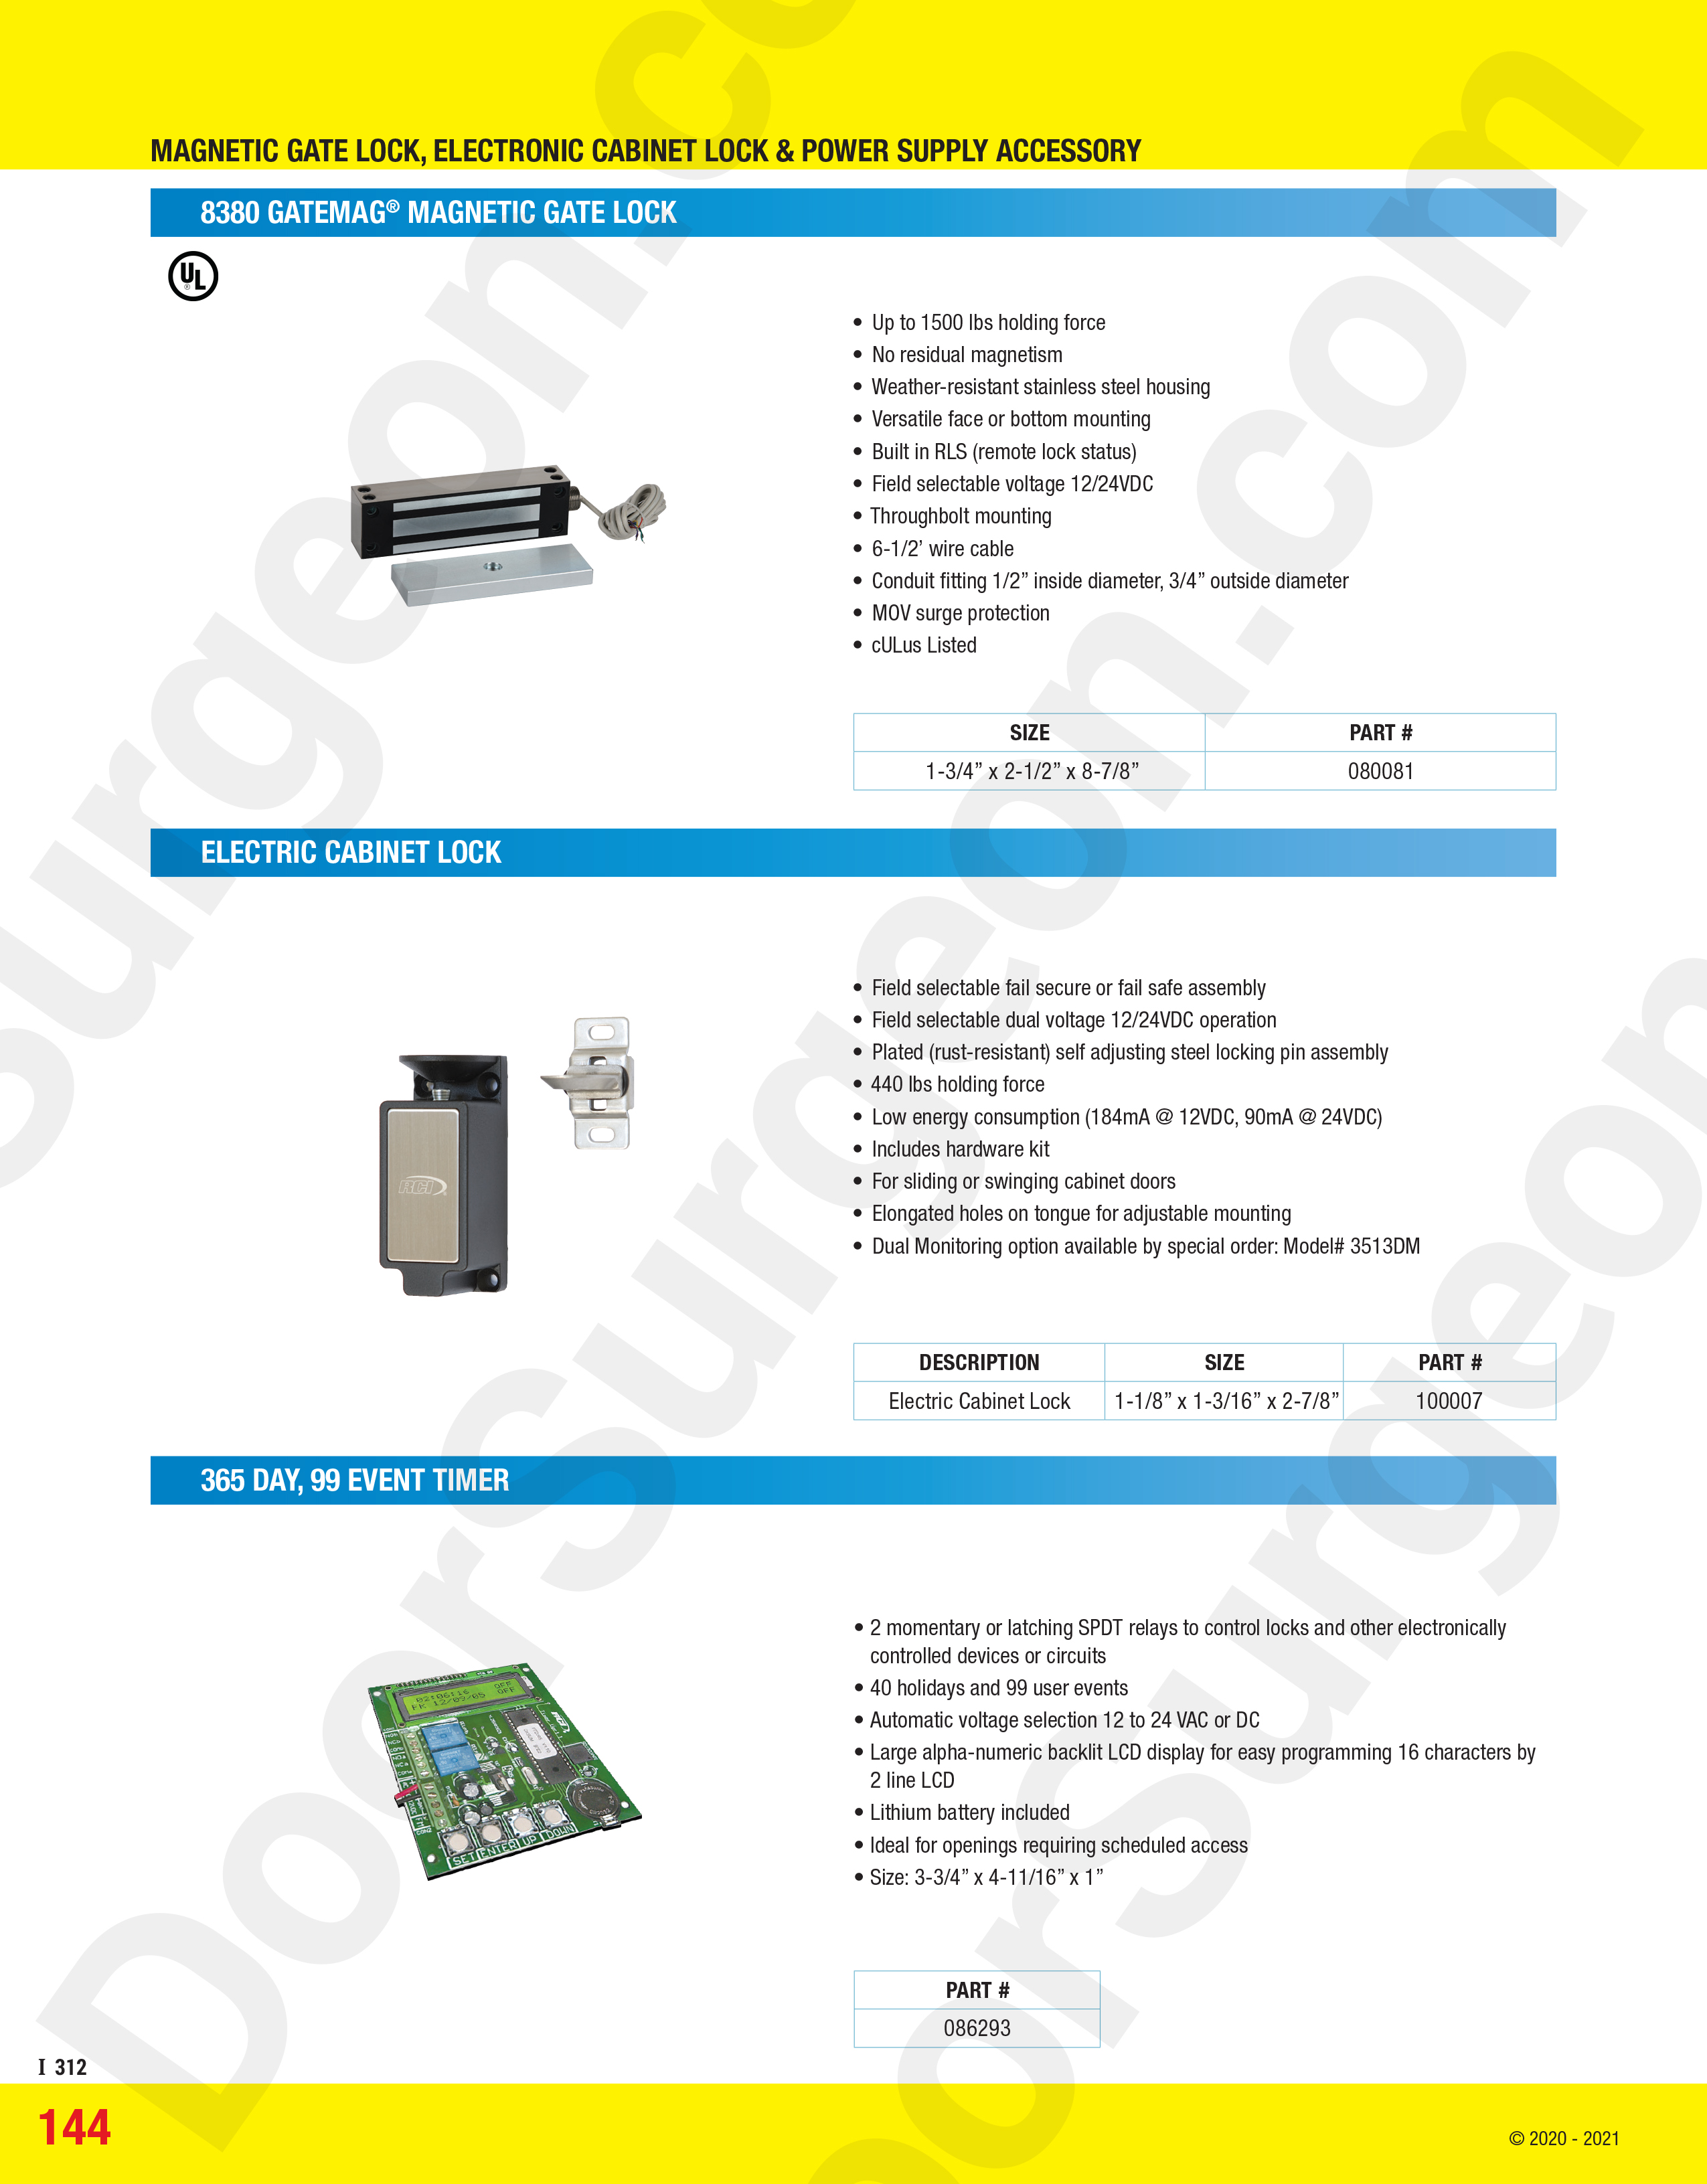 Magnetic gate-lock electronic cabinet lock and power supply accessories.